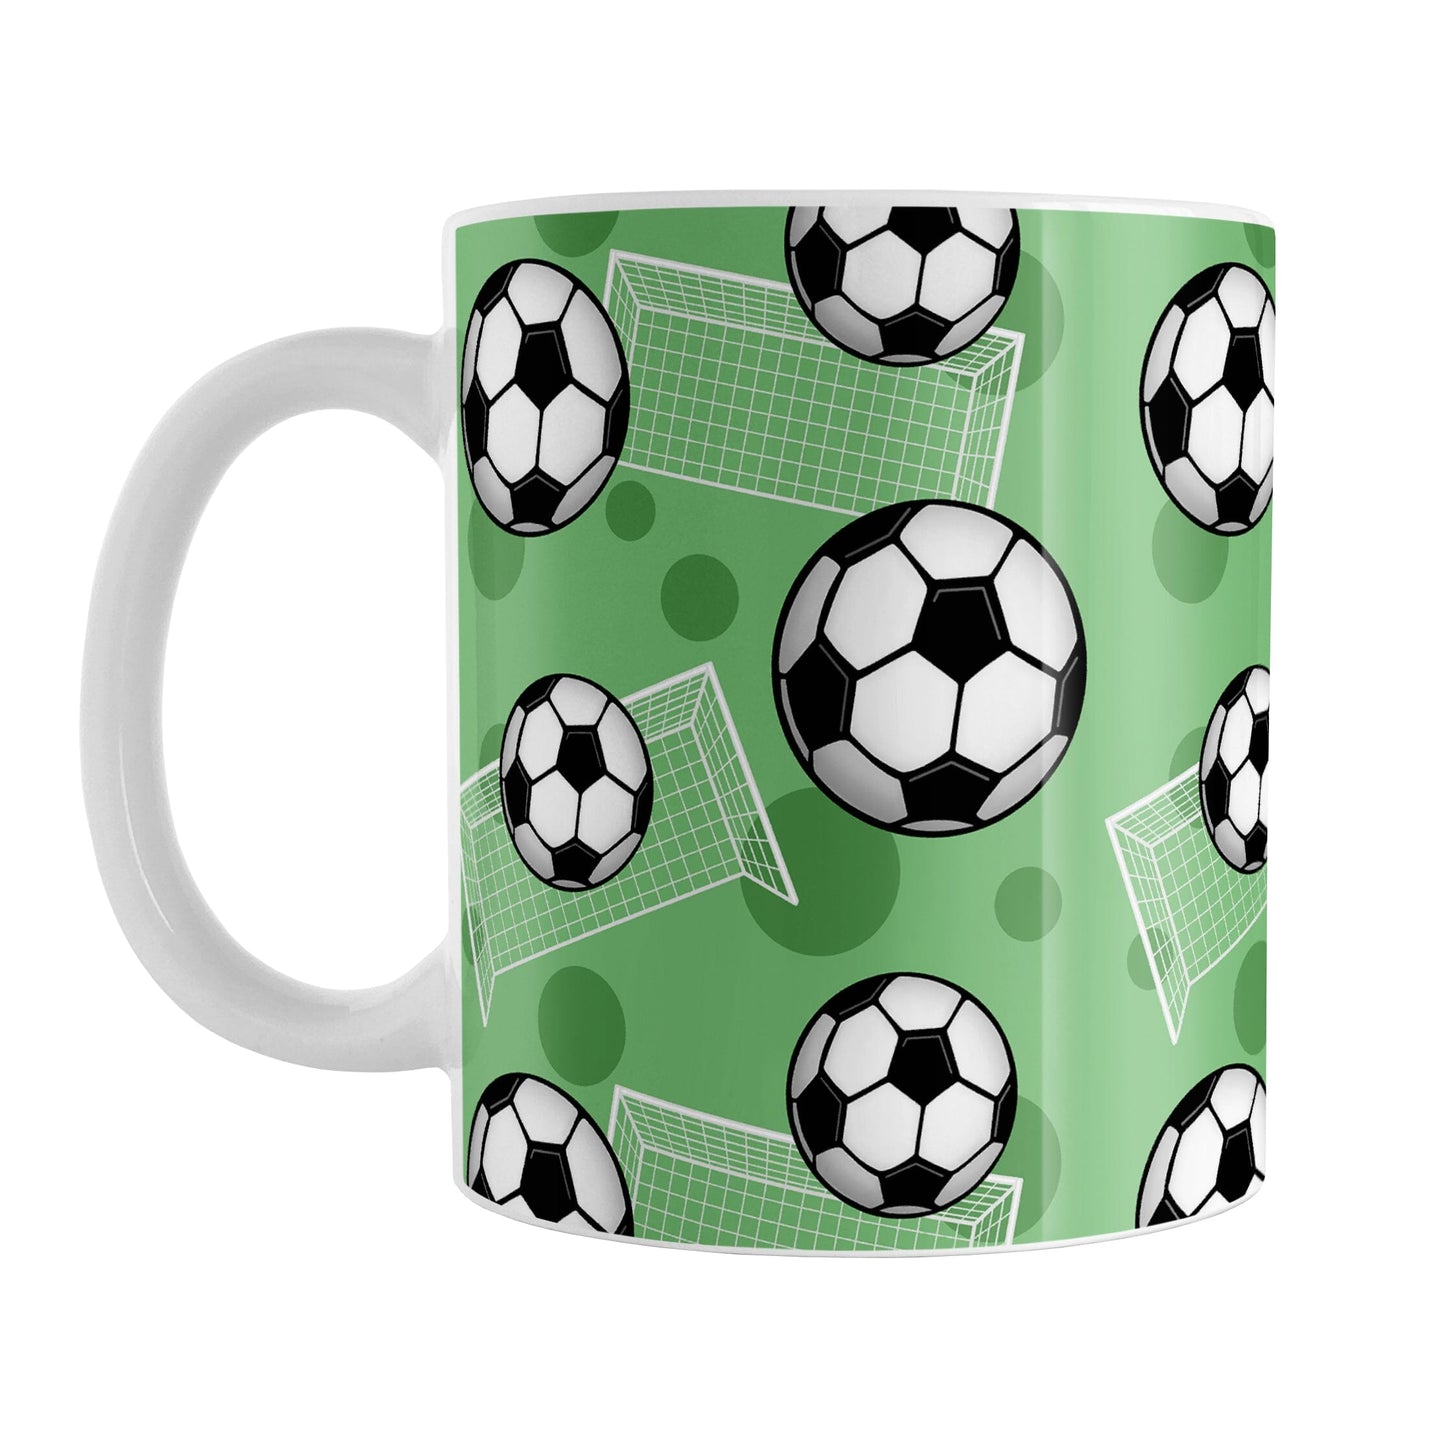 Soccer Ball and Goal Pattern Green Mug (11oz) at Amy's Coffee Mugs. A ceramic coffee mug designed with a pattern of soccer balls and soccer goals over a green background color with green circles. 